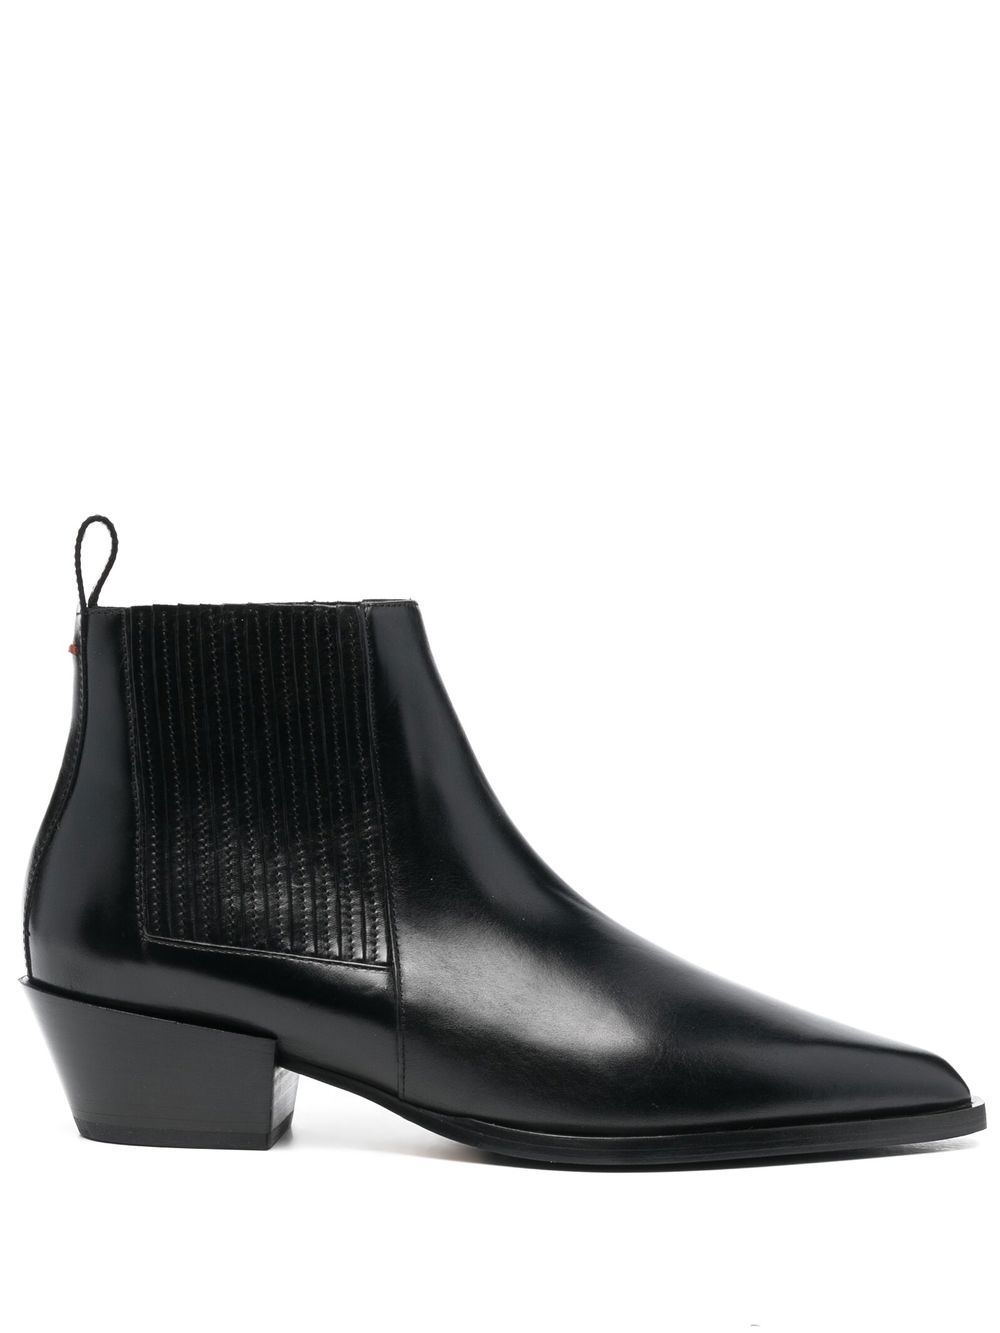 Aeyde pointed-toe leather ankle boots - Black von Aeyde